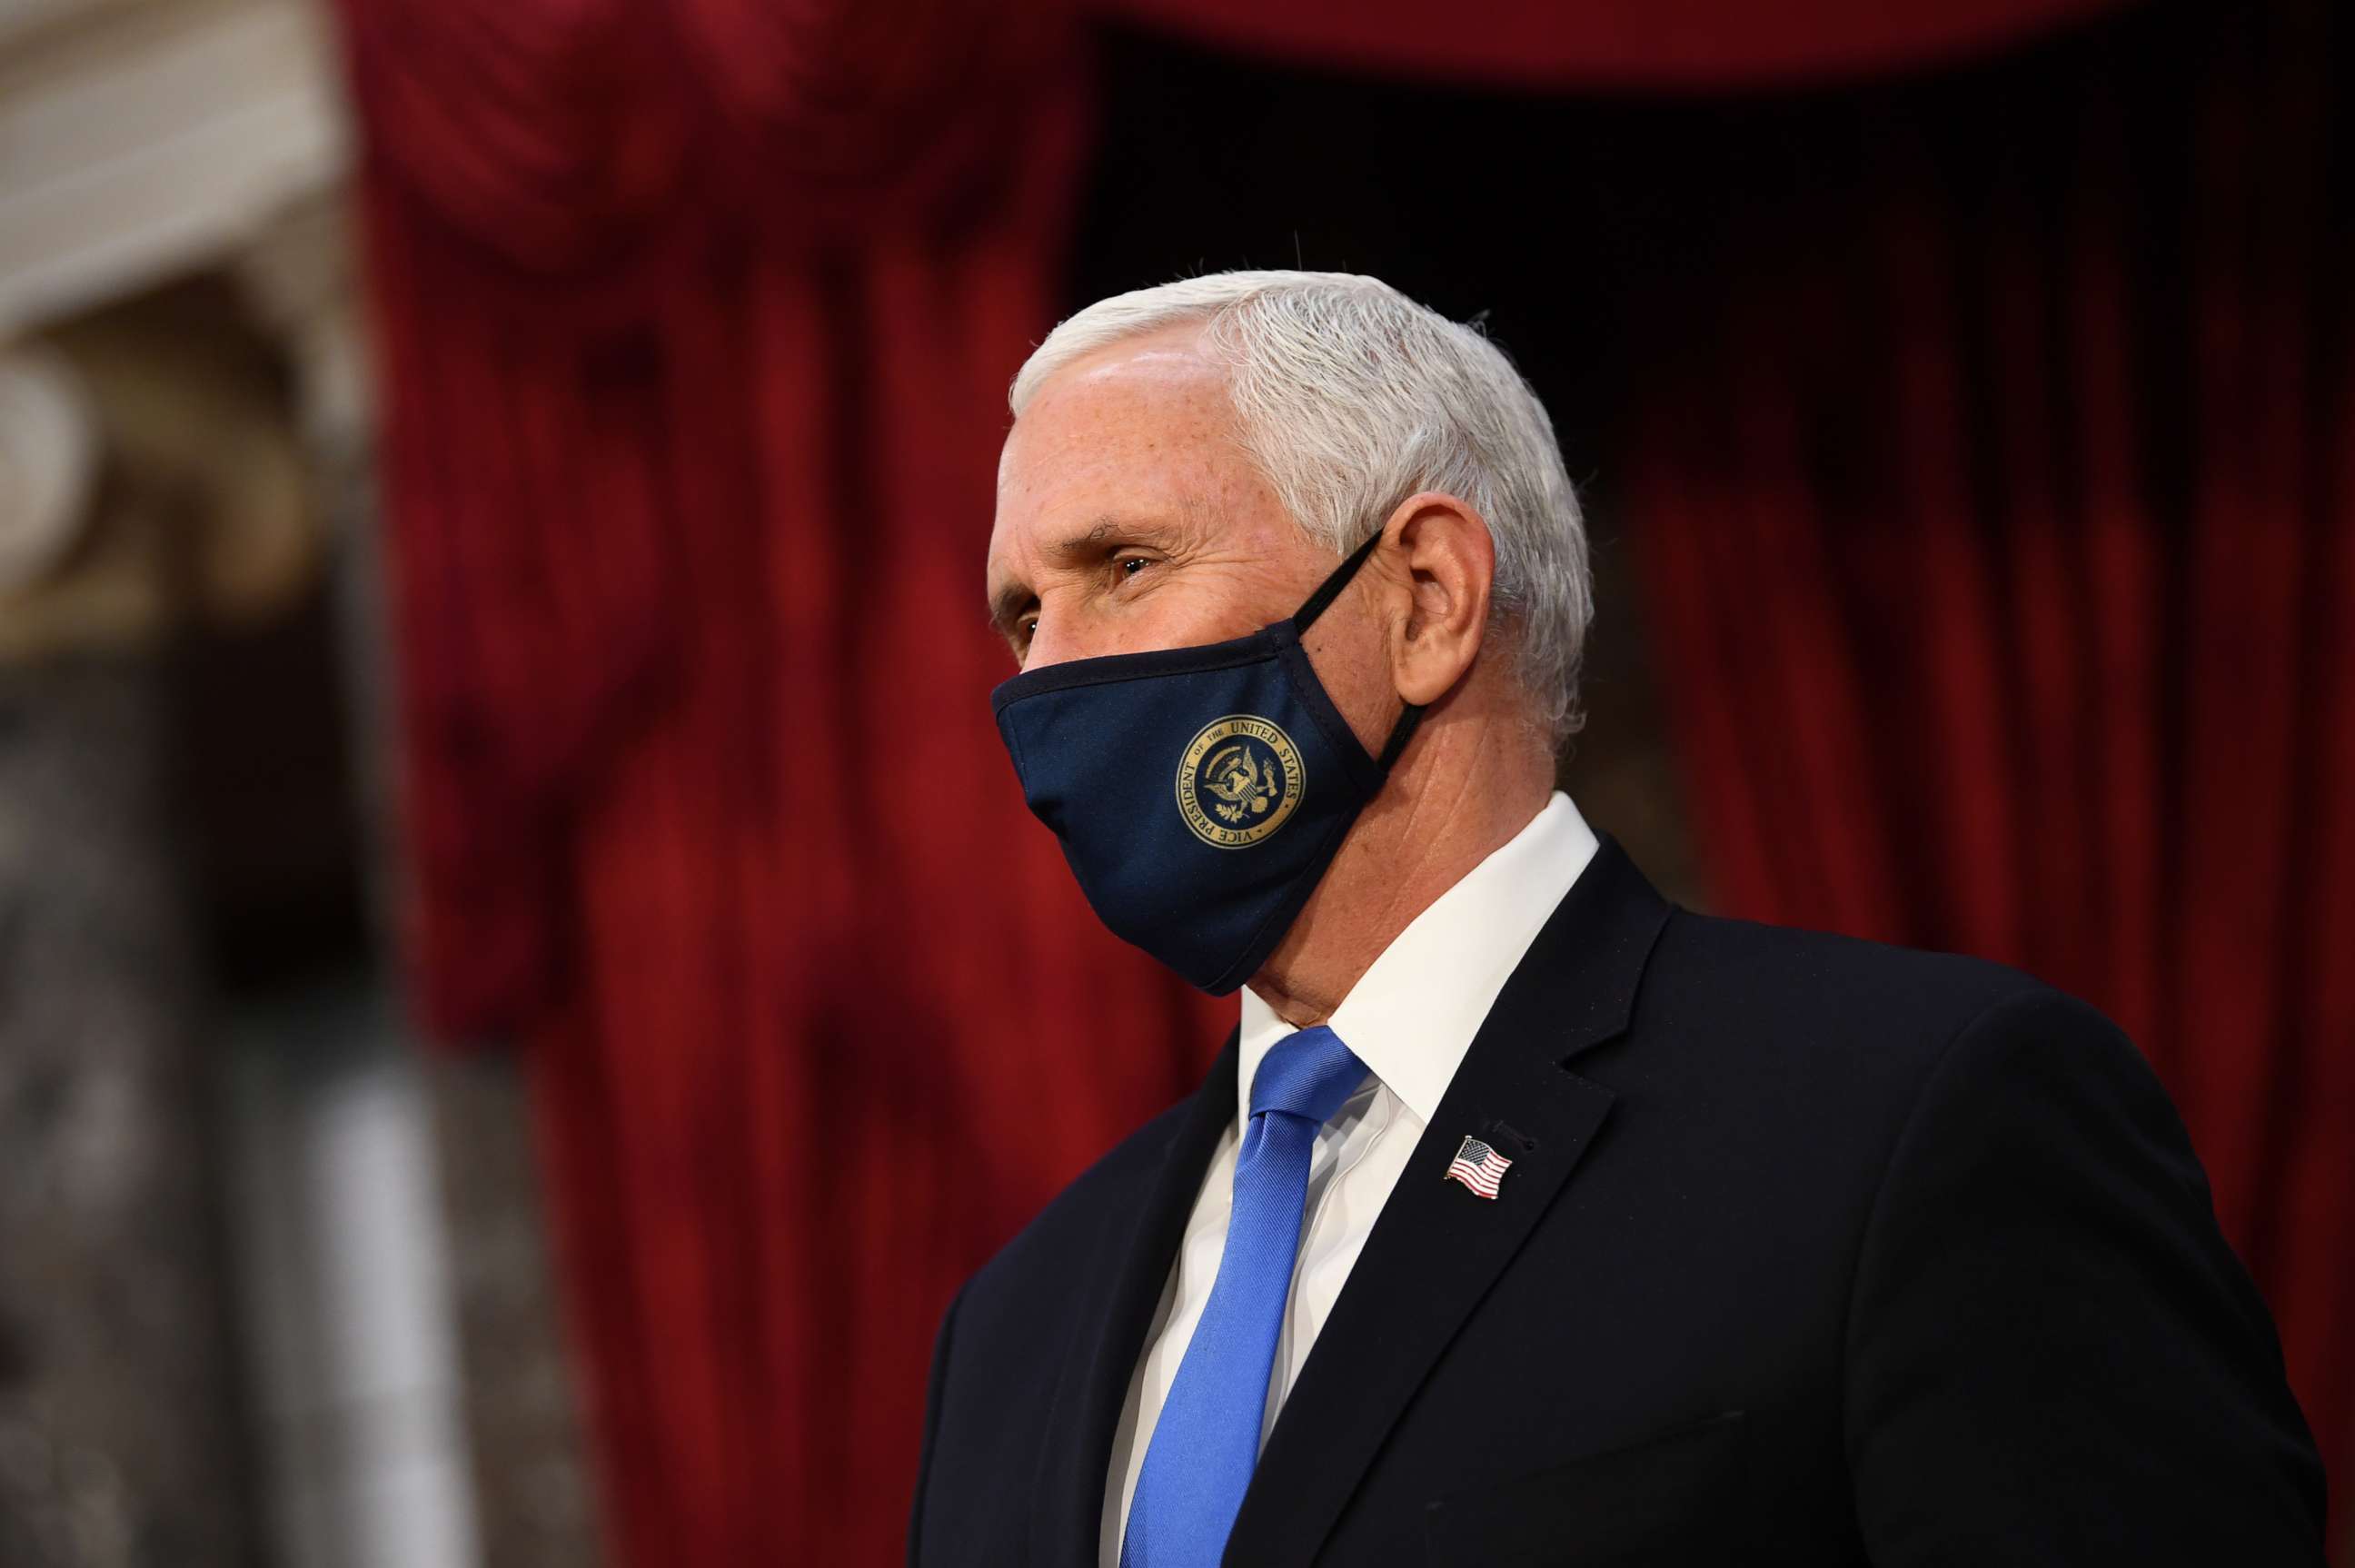 PHOTO: Vice President Mike Pence wears a face mask as he waits to participate in mock swearing-in ceremonies for Senators in the Old Senate Chambers at the U.S. Capitol Building, Jan. 3, 2021, in Washington.